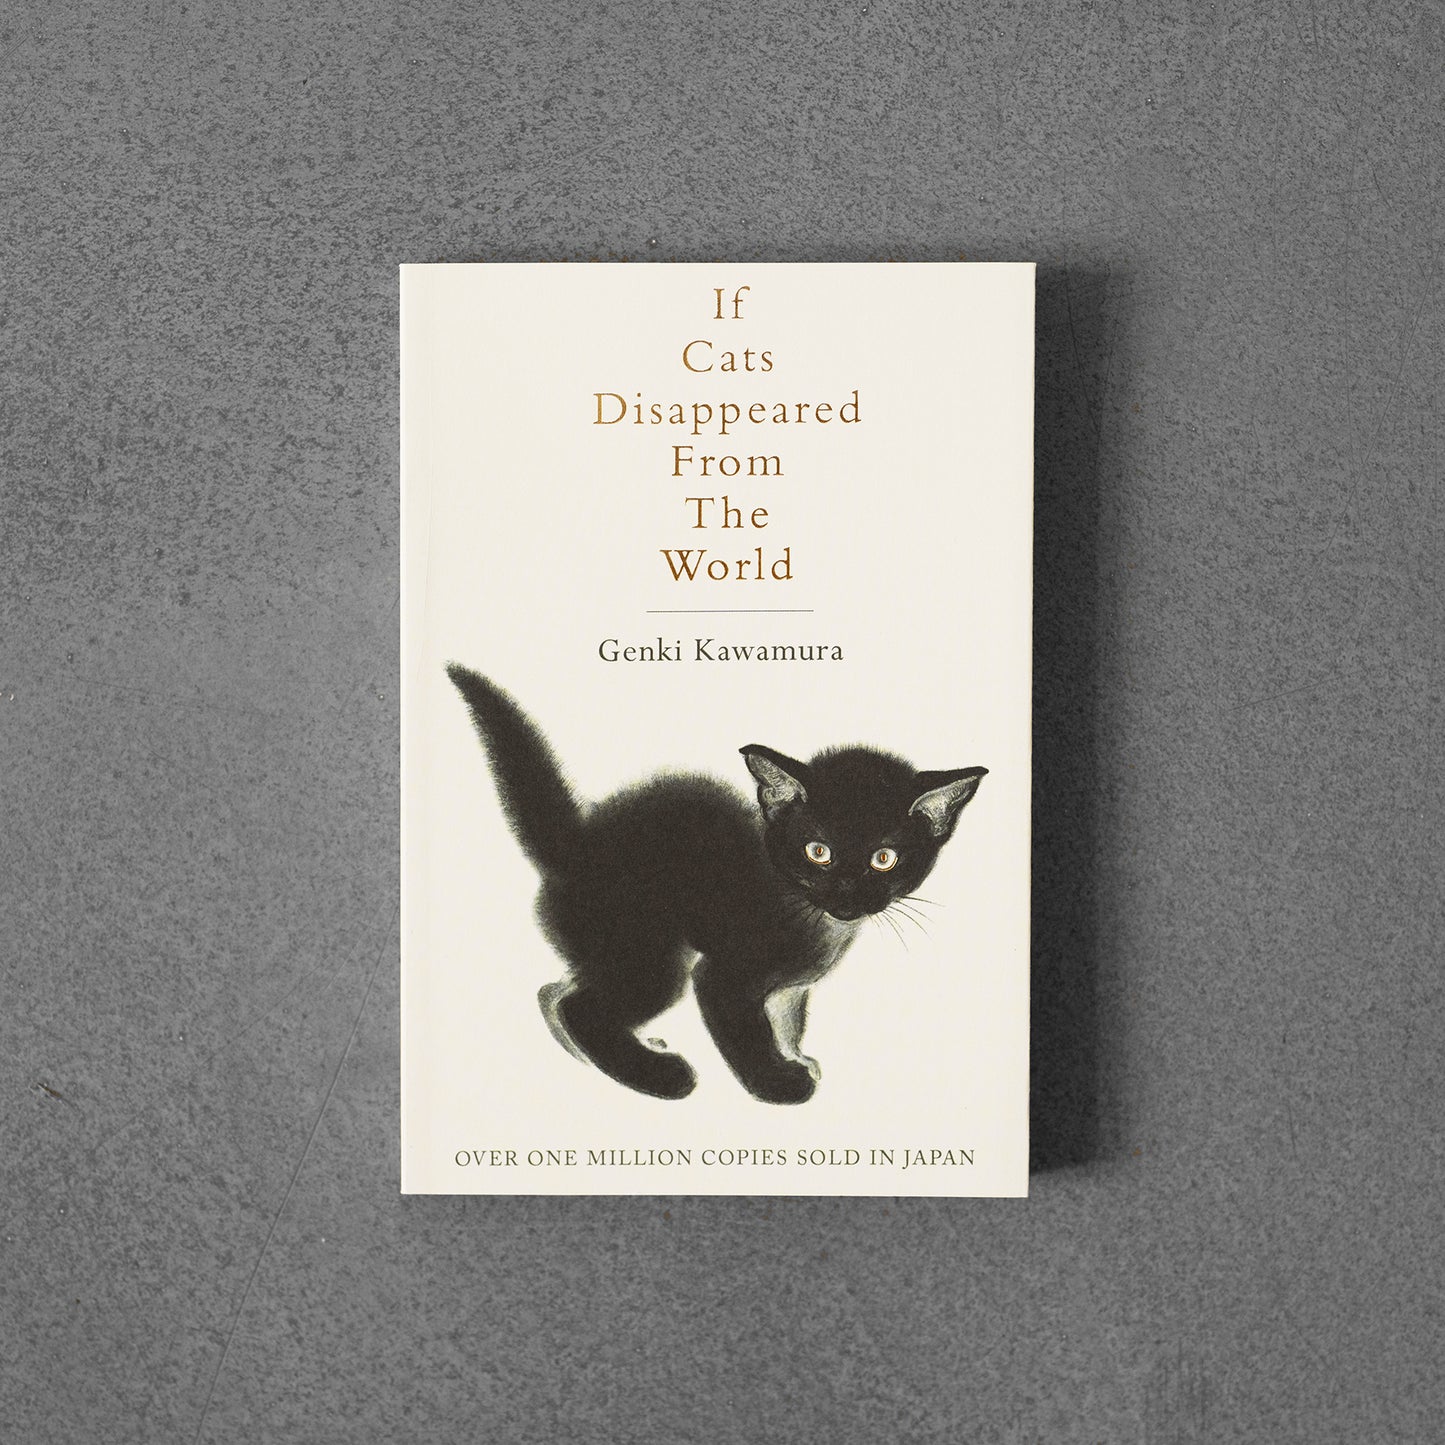 If Cats Disappeared From the World – Genki Kawamura